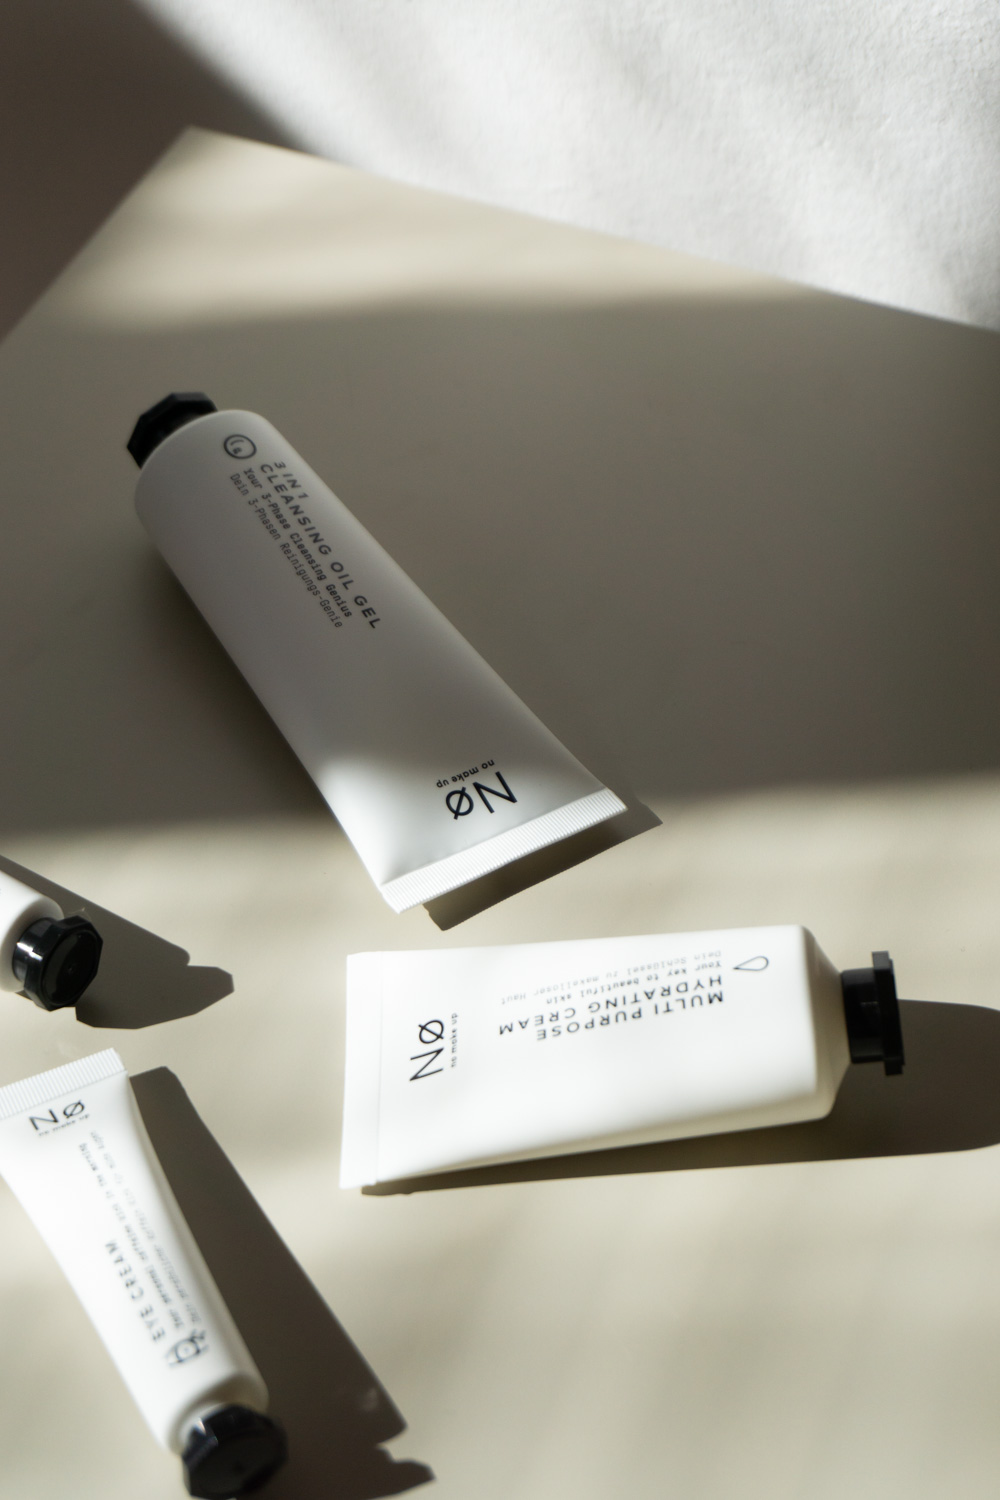 No Cosmetics - Minimalist Skincare, Simple Everyday Beauty | Product Photography, Packaging Design, Shadow Play, Lighting, Vegan Cosmetics | RG Daily Blog